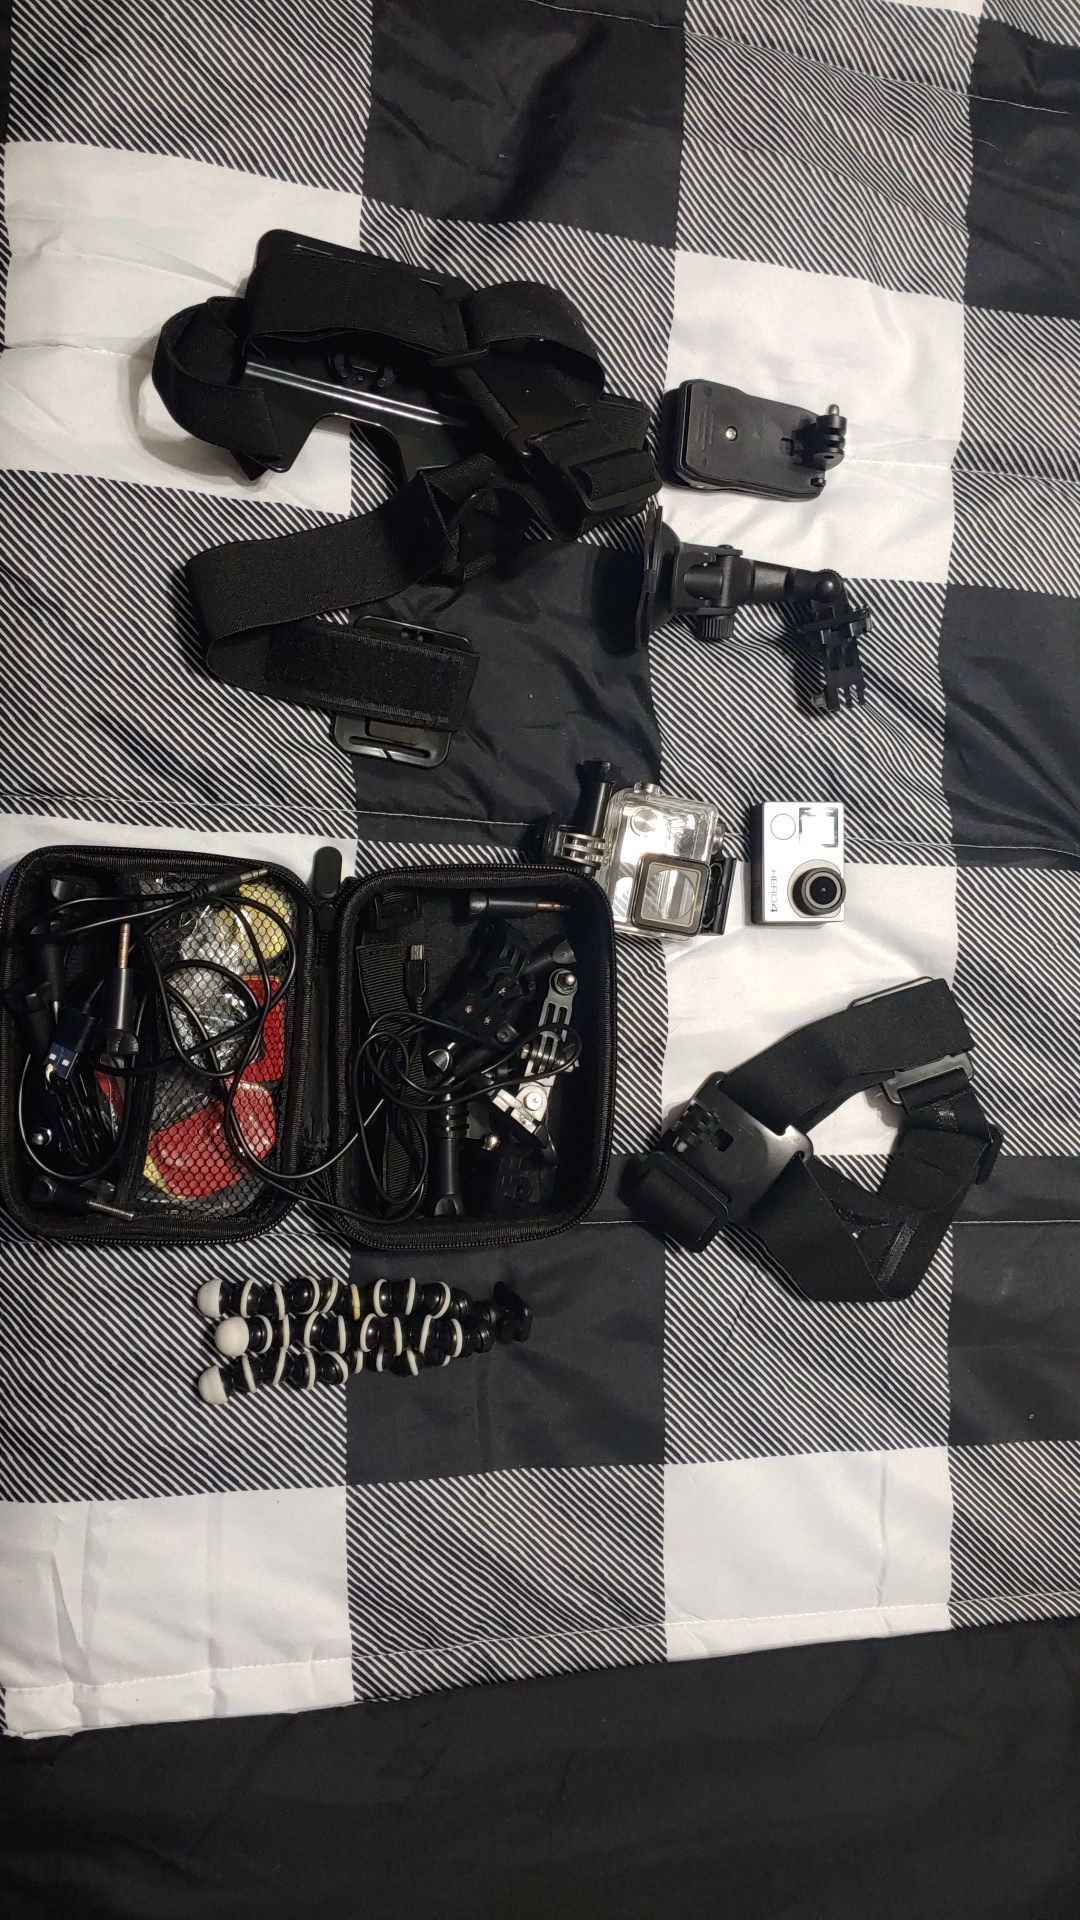 Gopro hero 4 silver with accessories